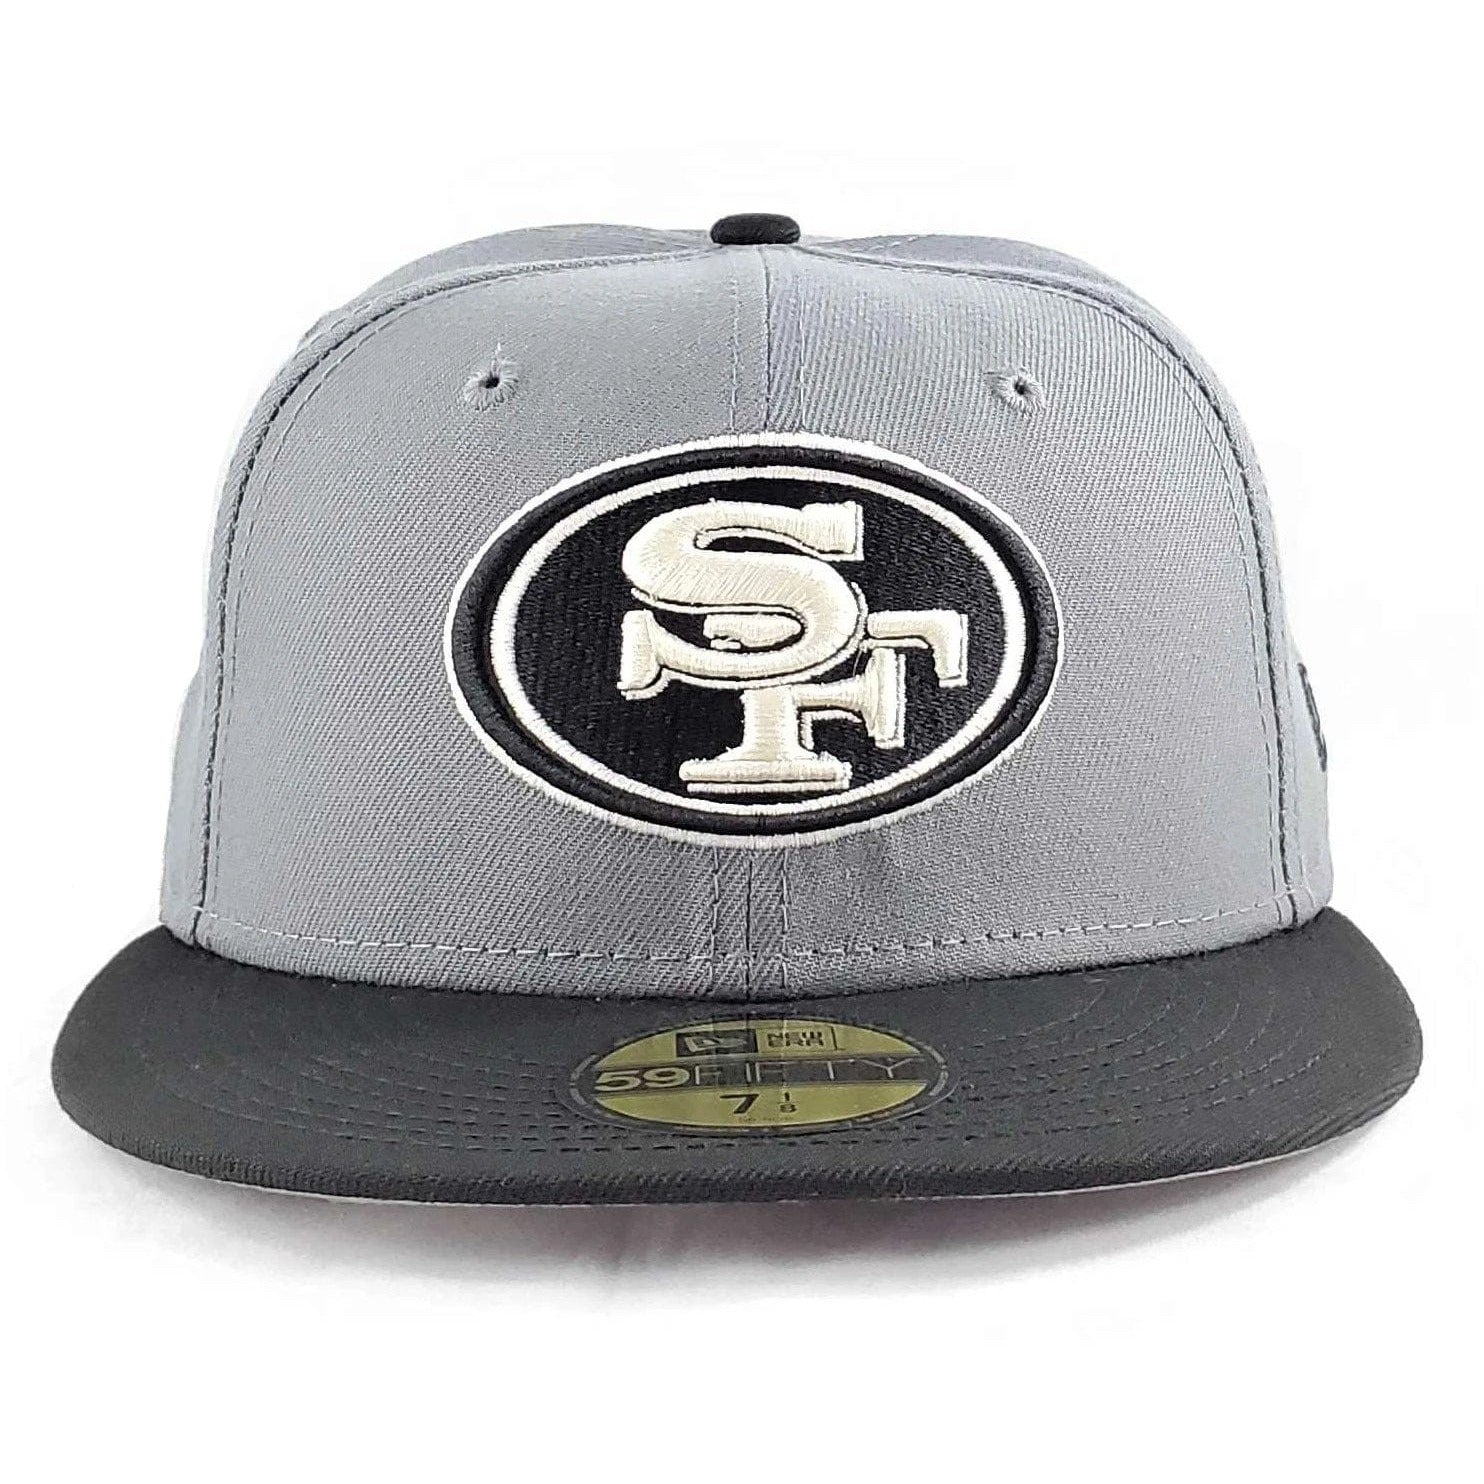 NEW ERA - SF 49ers 2Tone Gray 5950 Fitted Cap